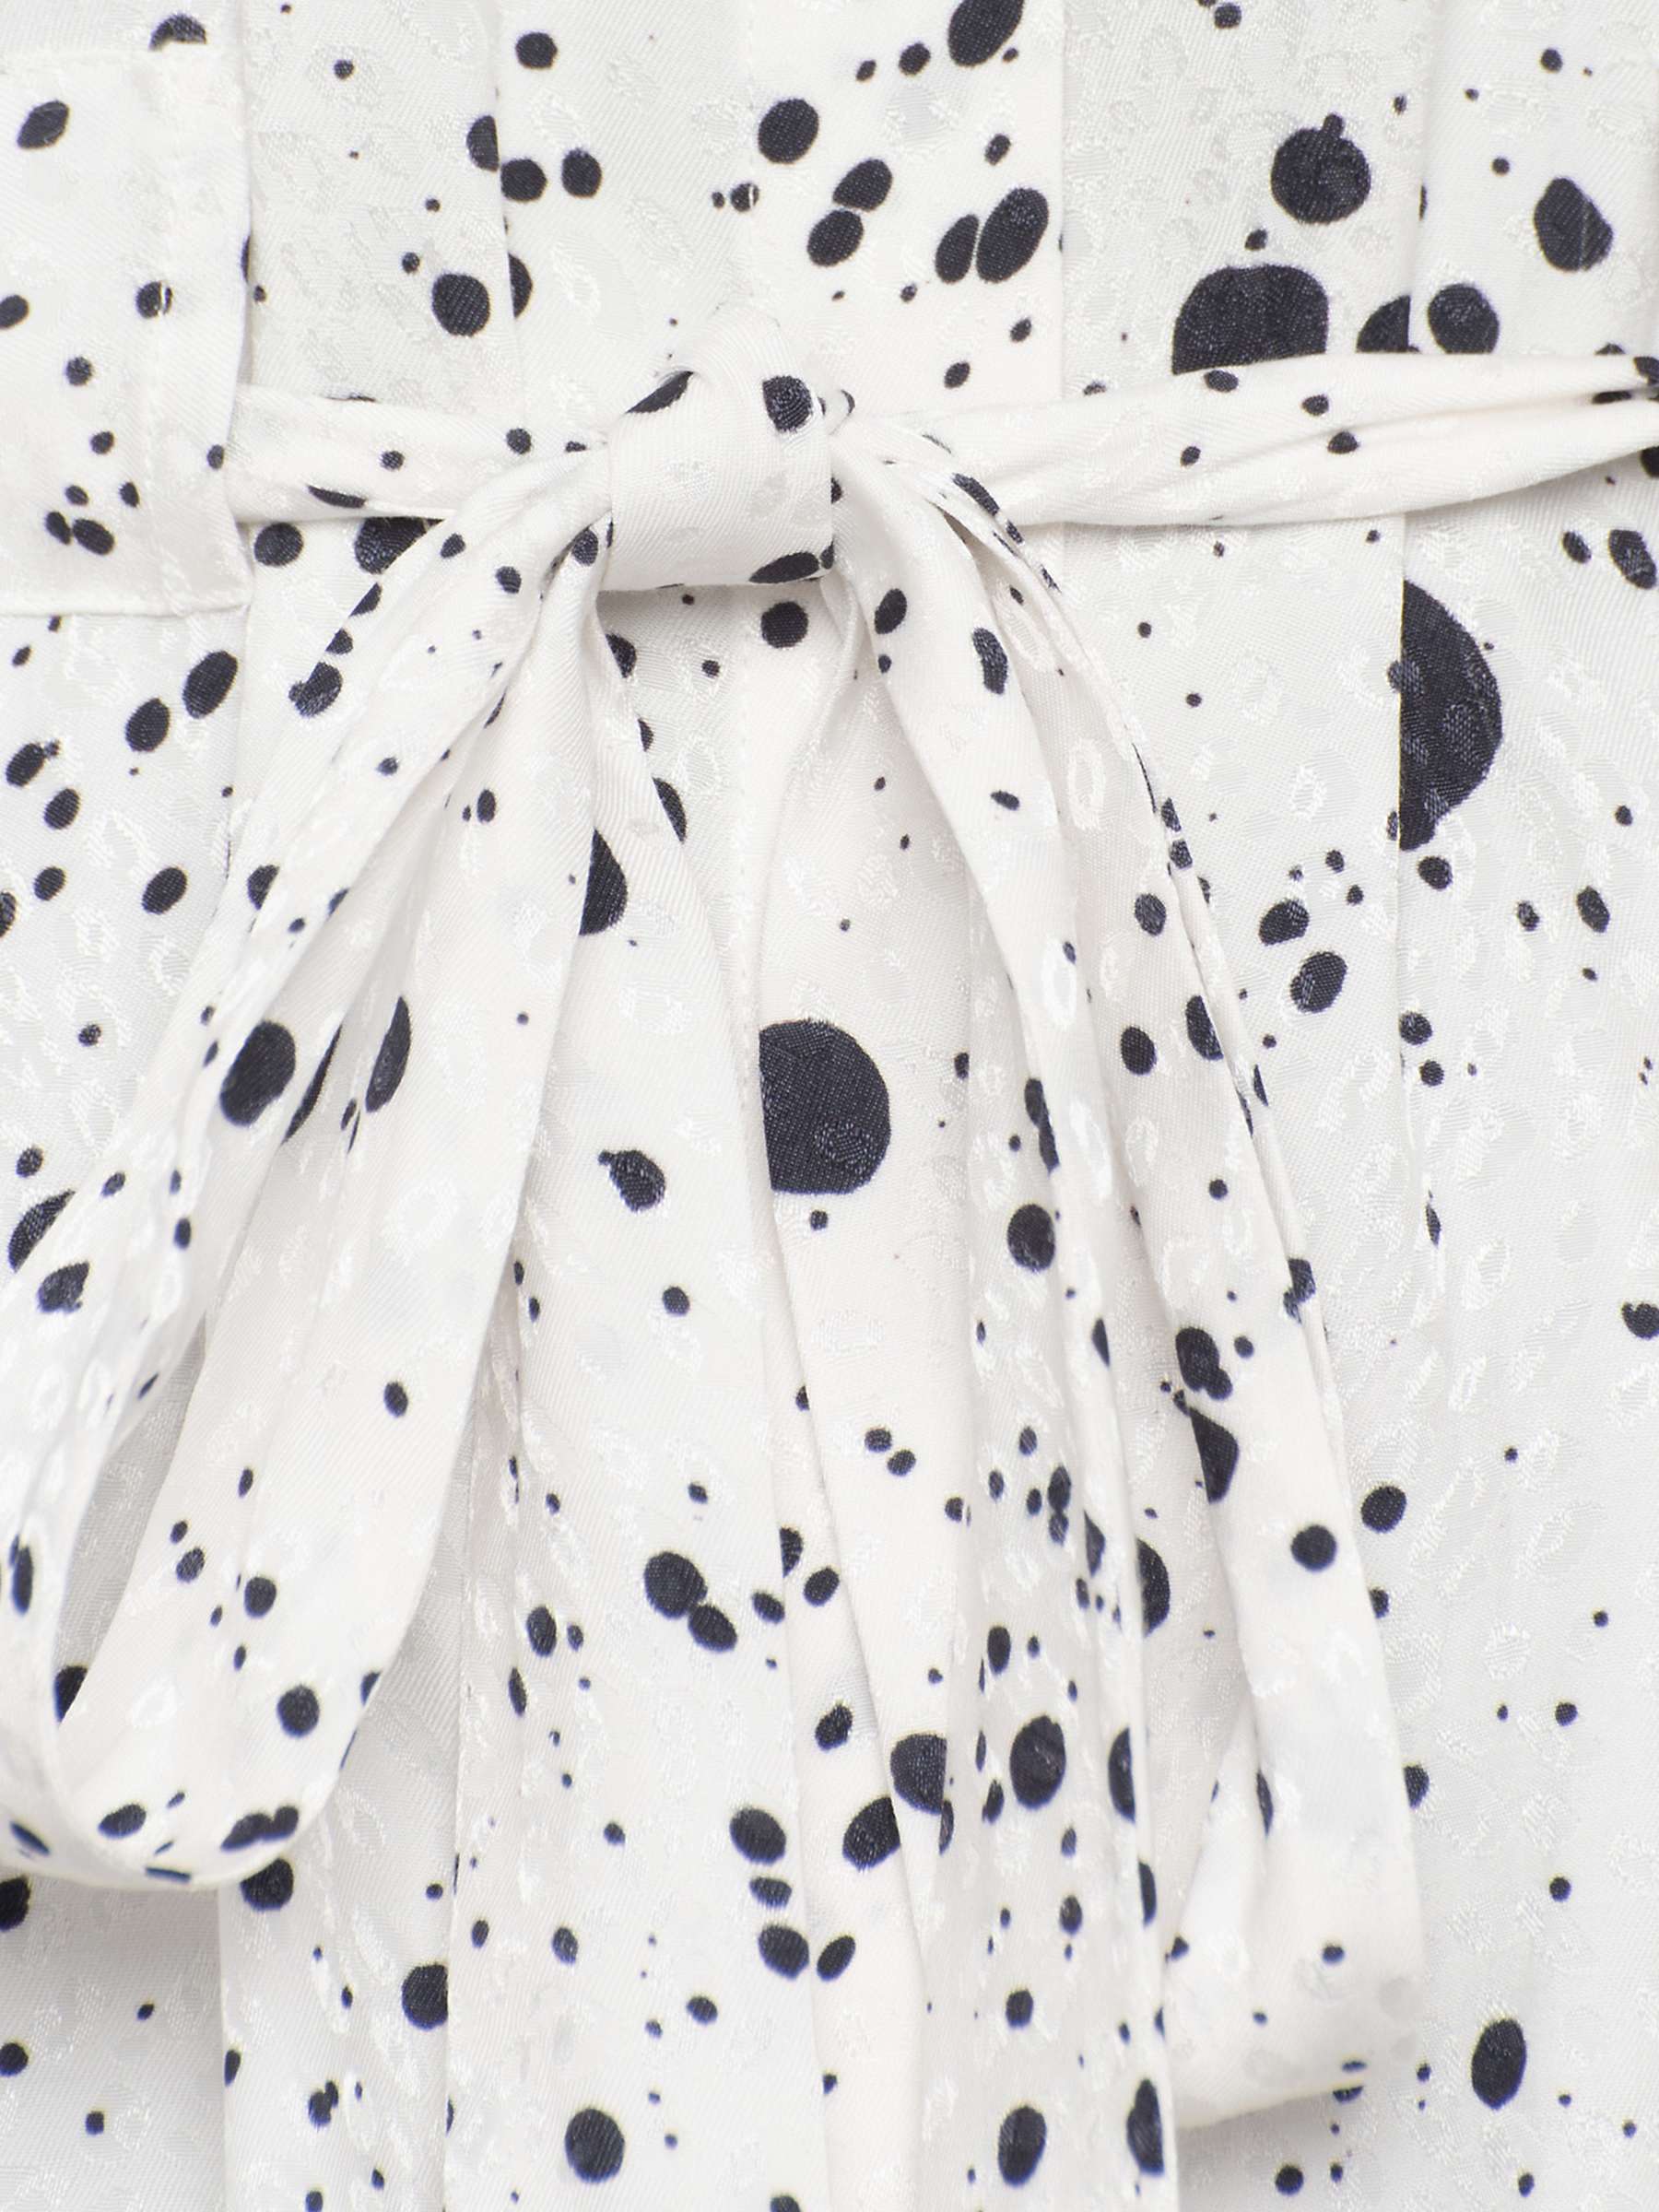 Buy French Connection Droplet Abstract Print Shirt Dress, Summer White/Black Online at johnlewis.com